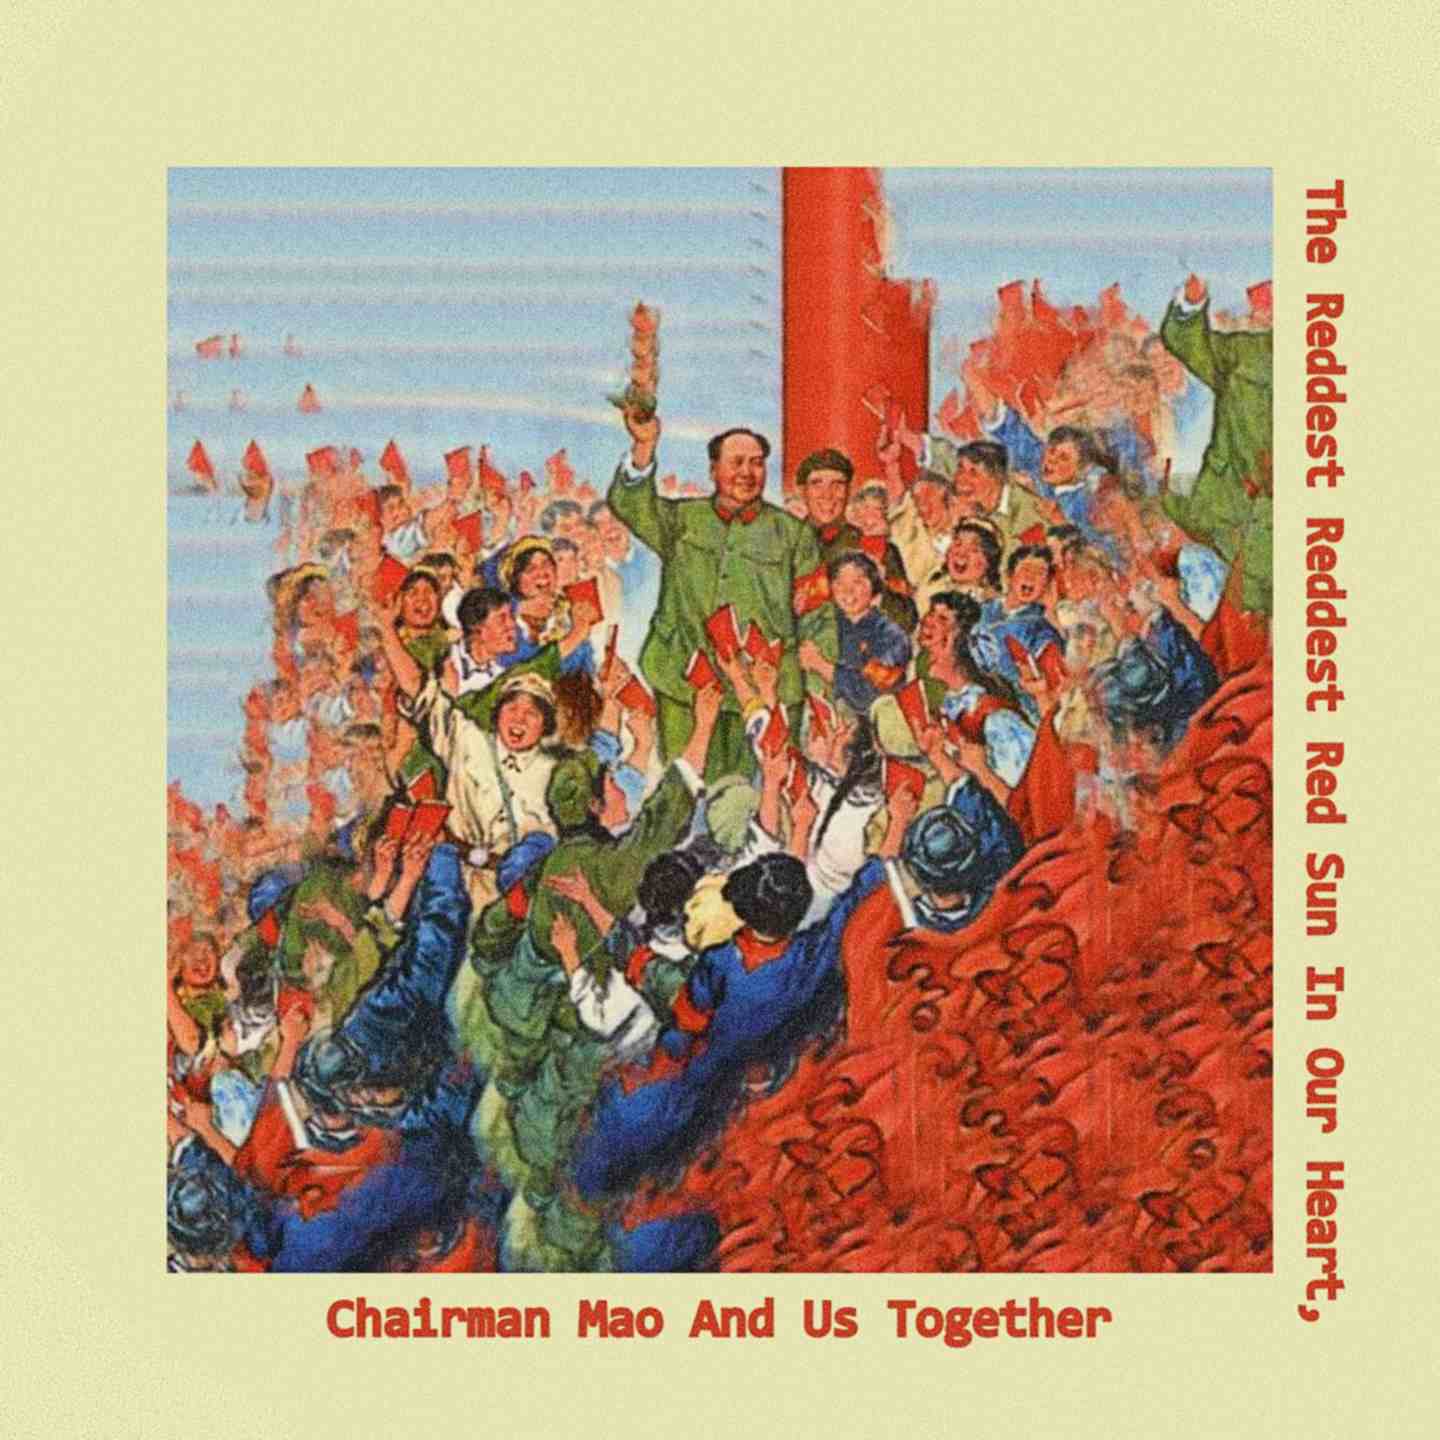 Andrew Vernon Coileight - The Reddest Reddest Red Sun In Our Mao Us Together - Reviews - Album of The Year